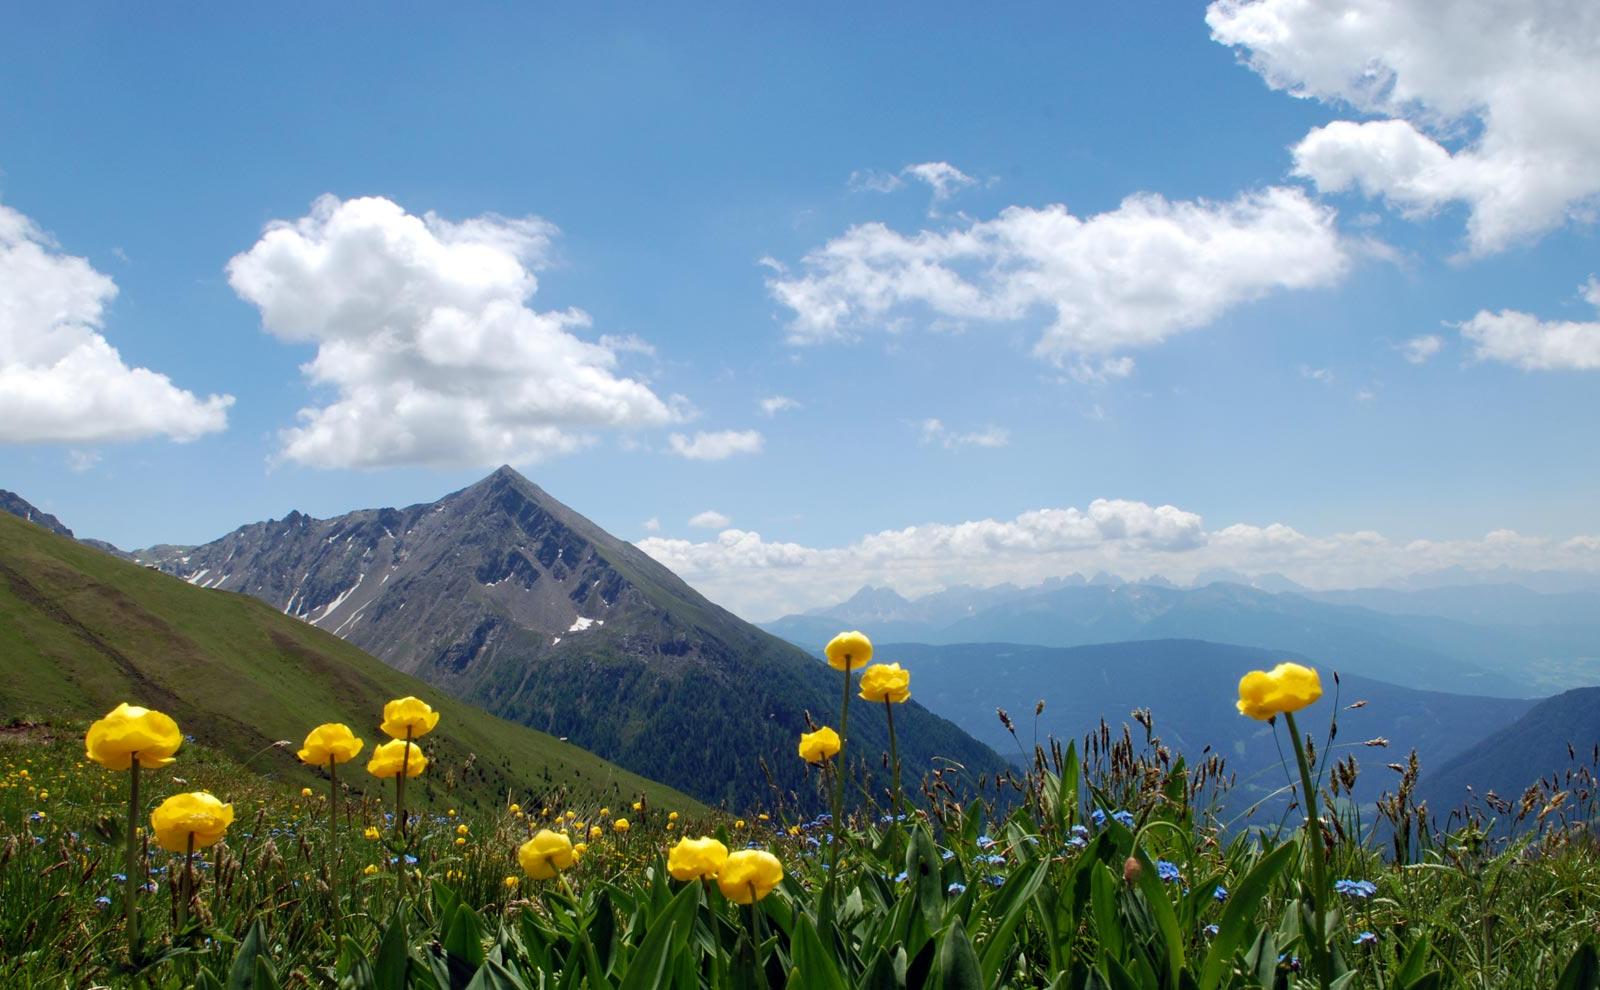 Hiking holiday for families in the Pusteria Valley